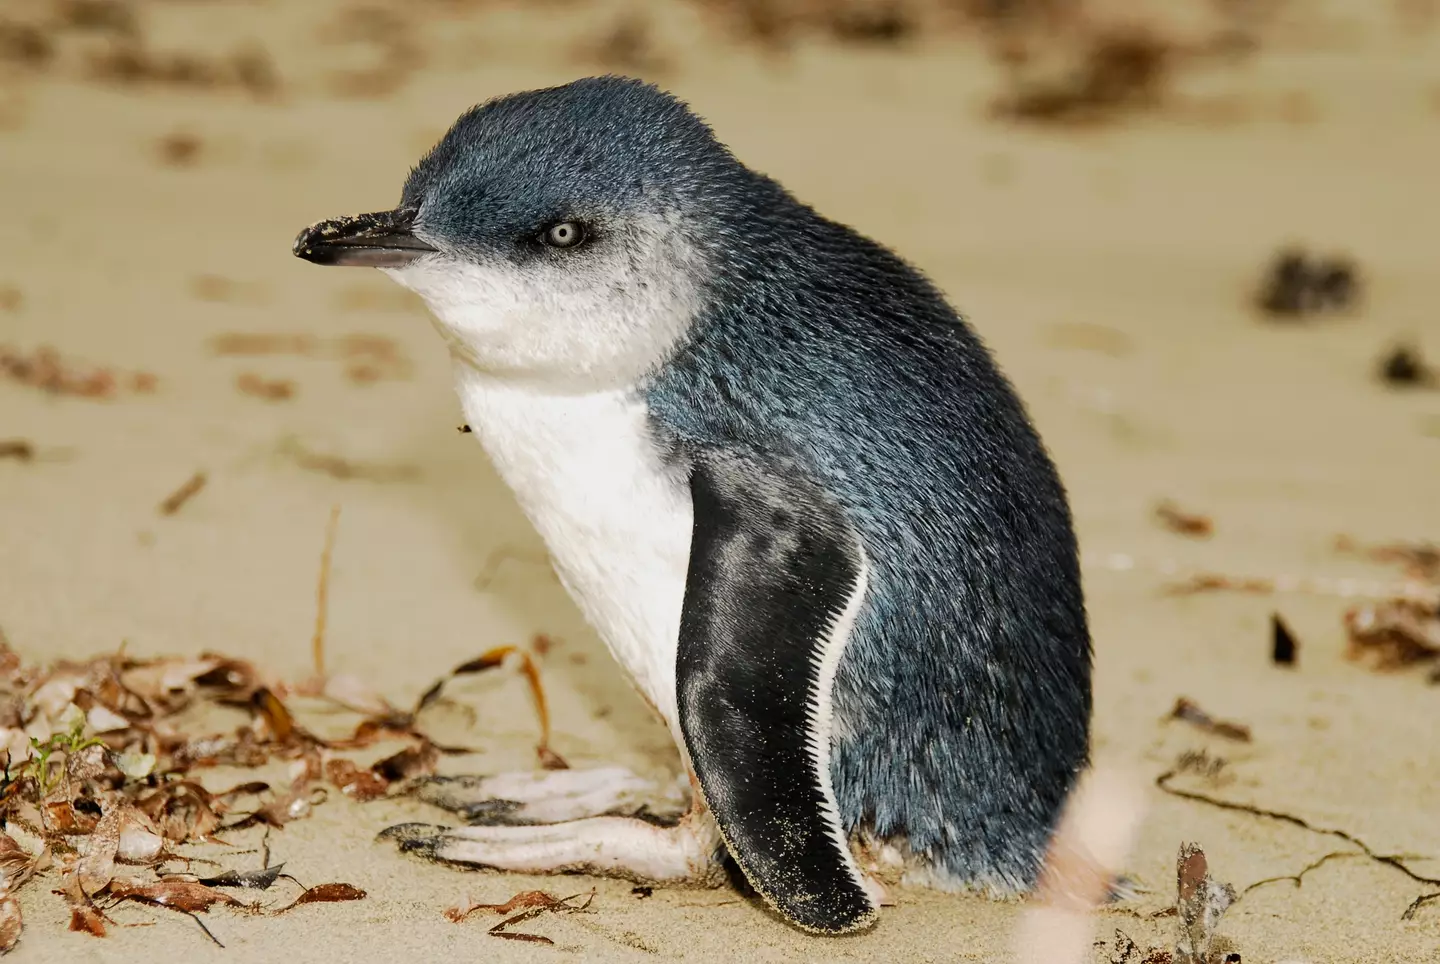 Dozens of decapitated penguins have been washing ashore.